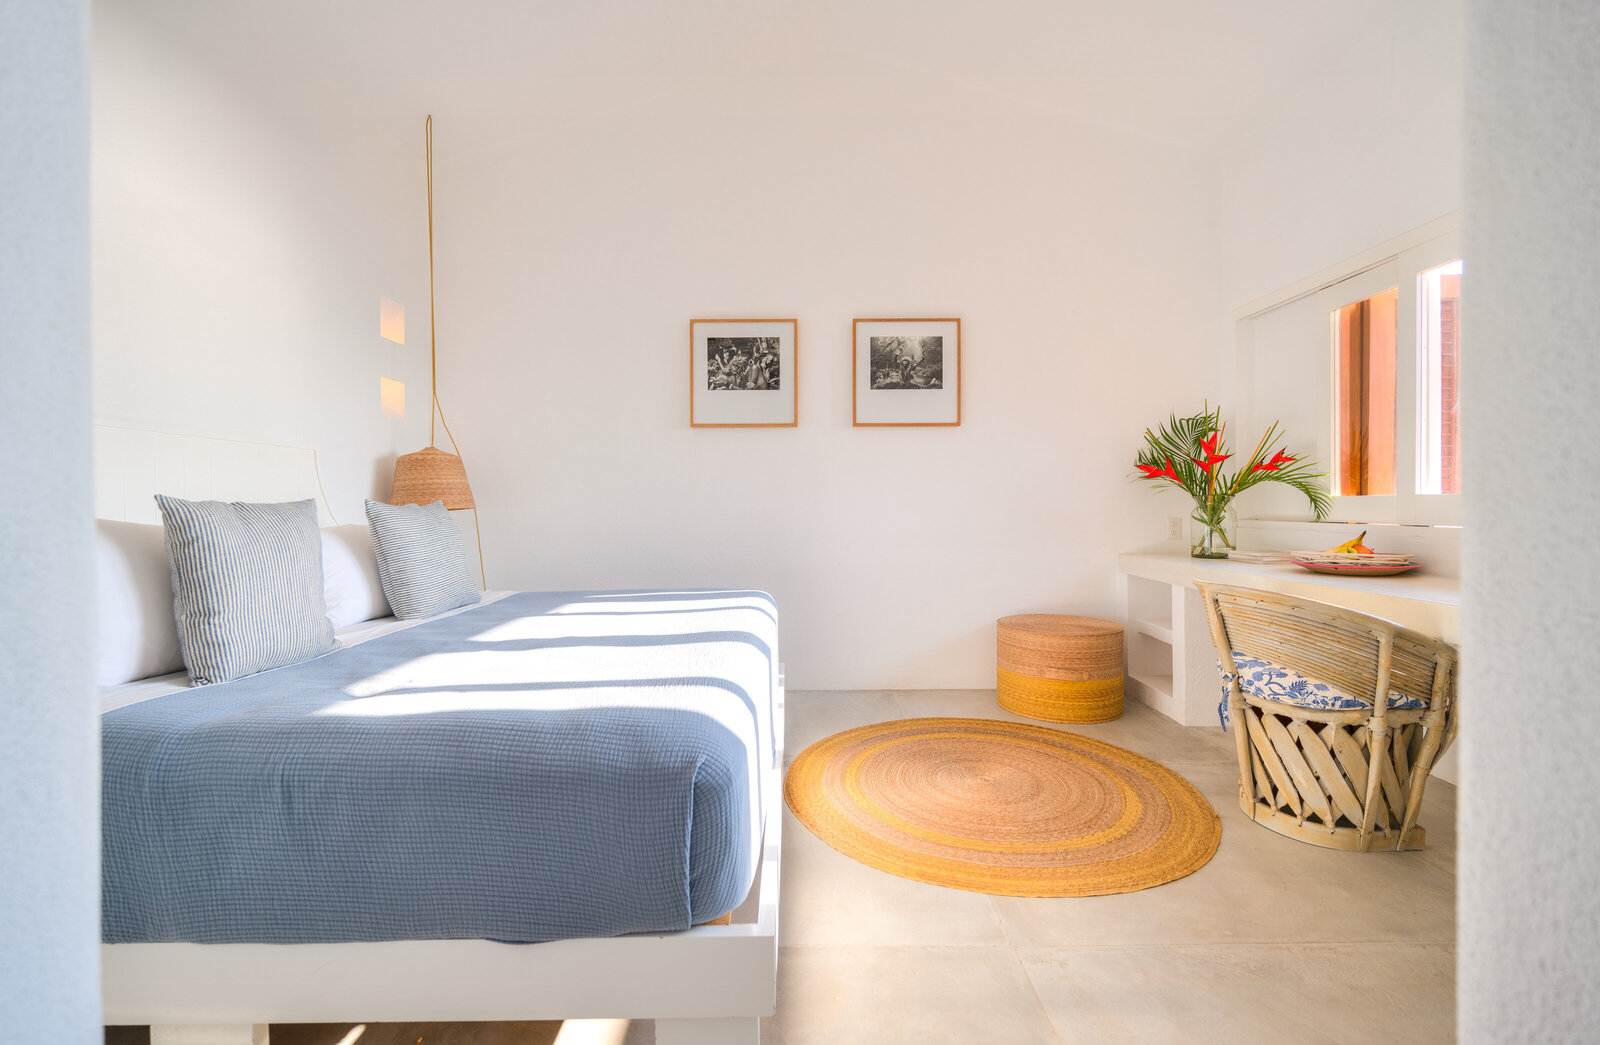 Hotel-Airbnb-Photography-P_JrSuite_CasitaAzul_Brands-That-Impact_Dic2022-0156